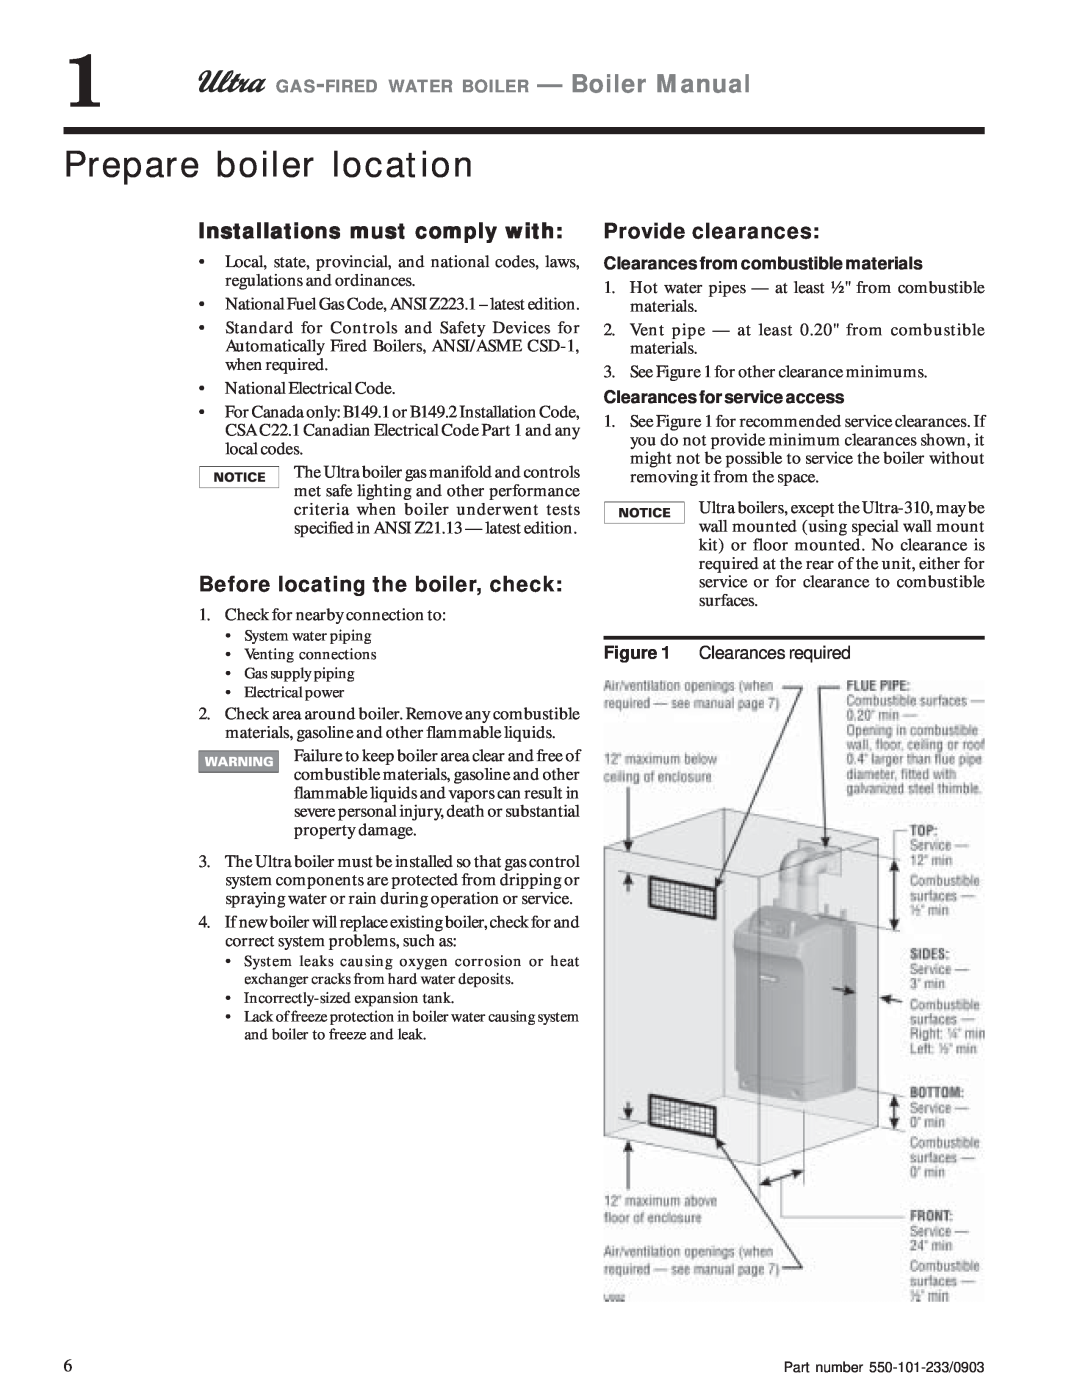 Weil-McLain 230, 80, 310, 105, 155 Prepare boiler location, Installations must comply with, Before locating the boiler, check 